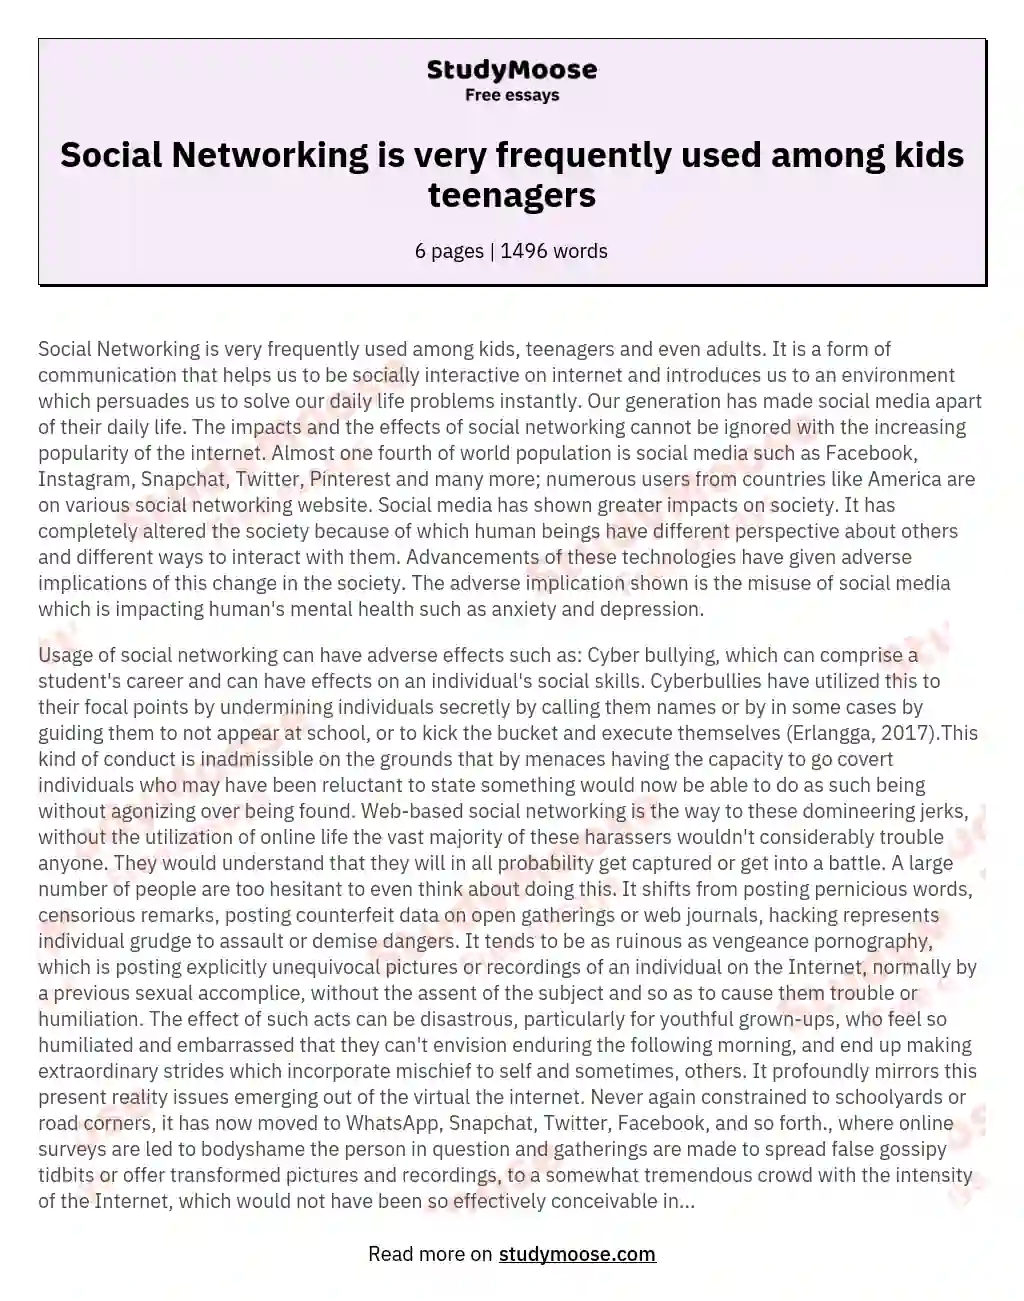 Social Networking is very frequently used among kids teenagers